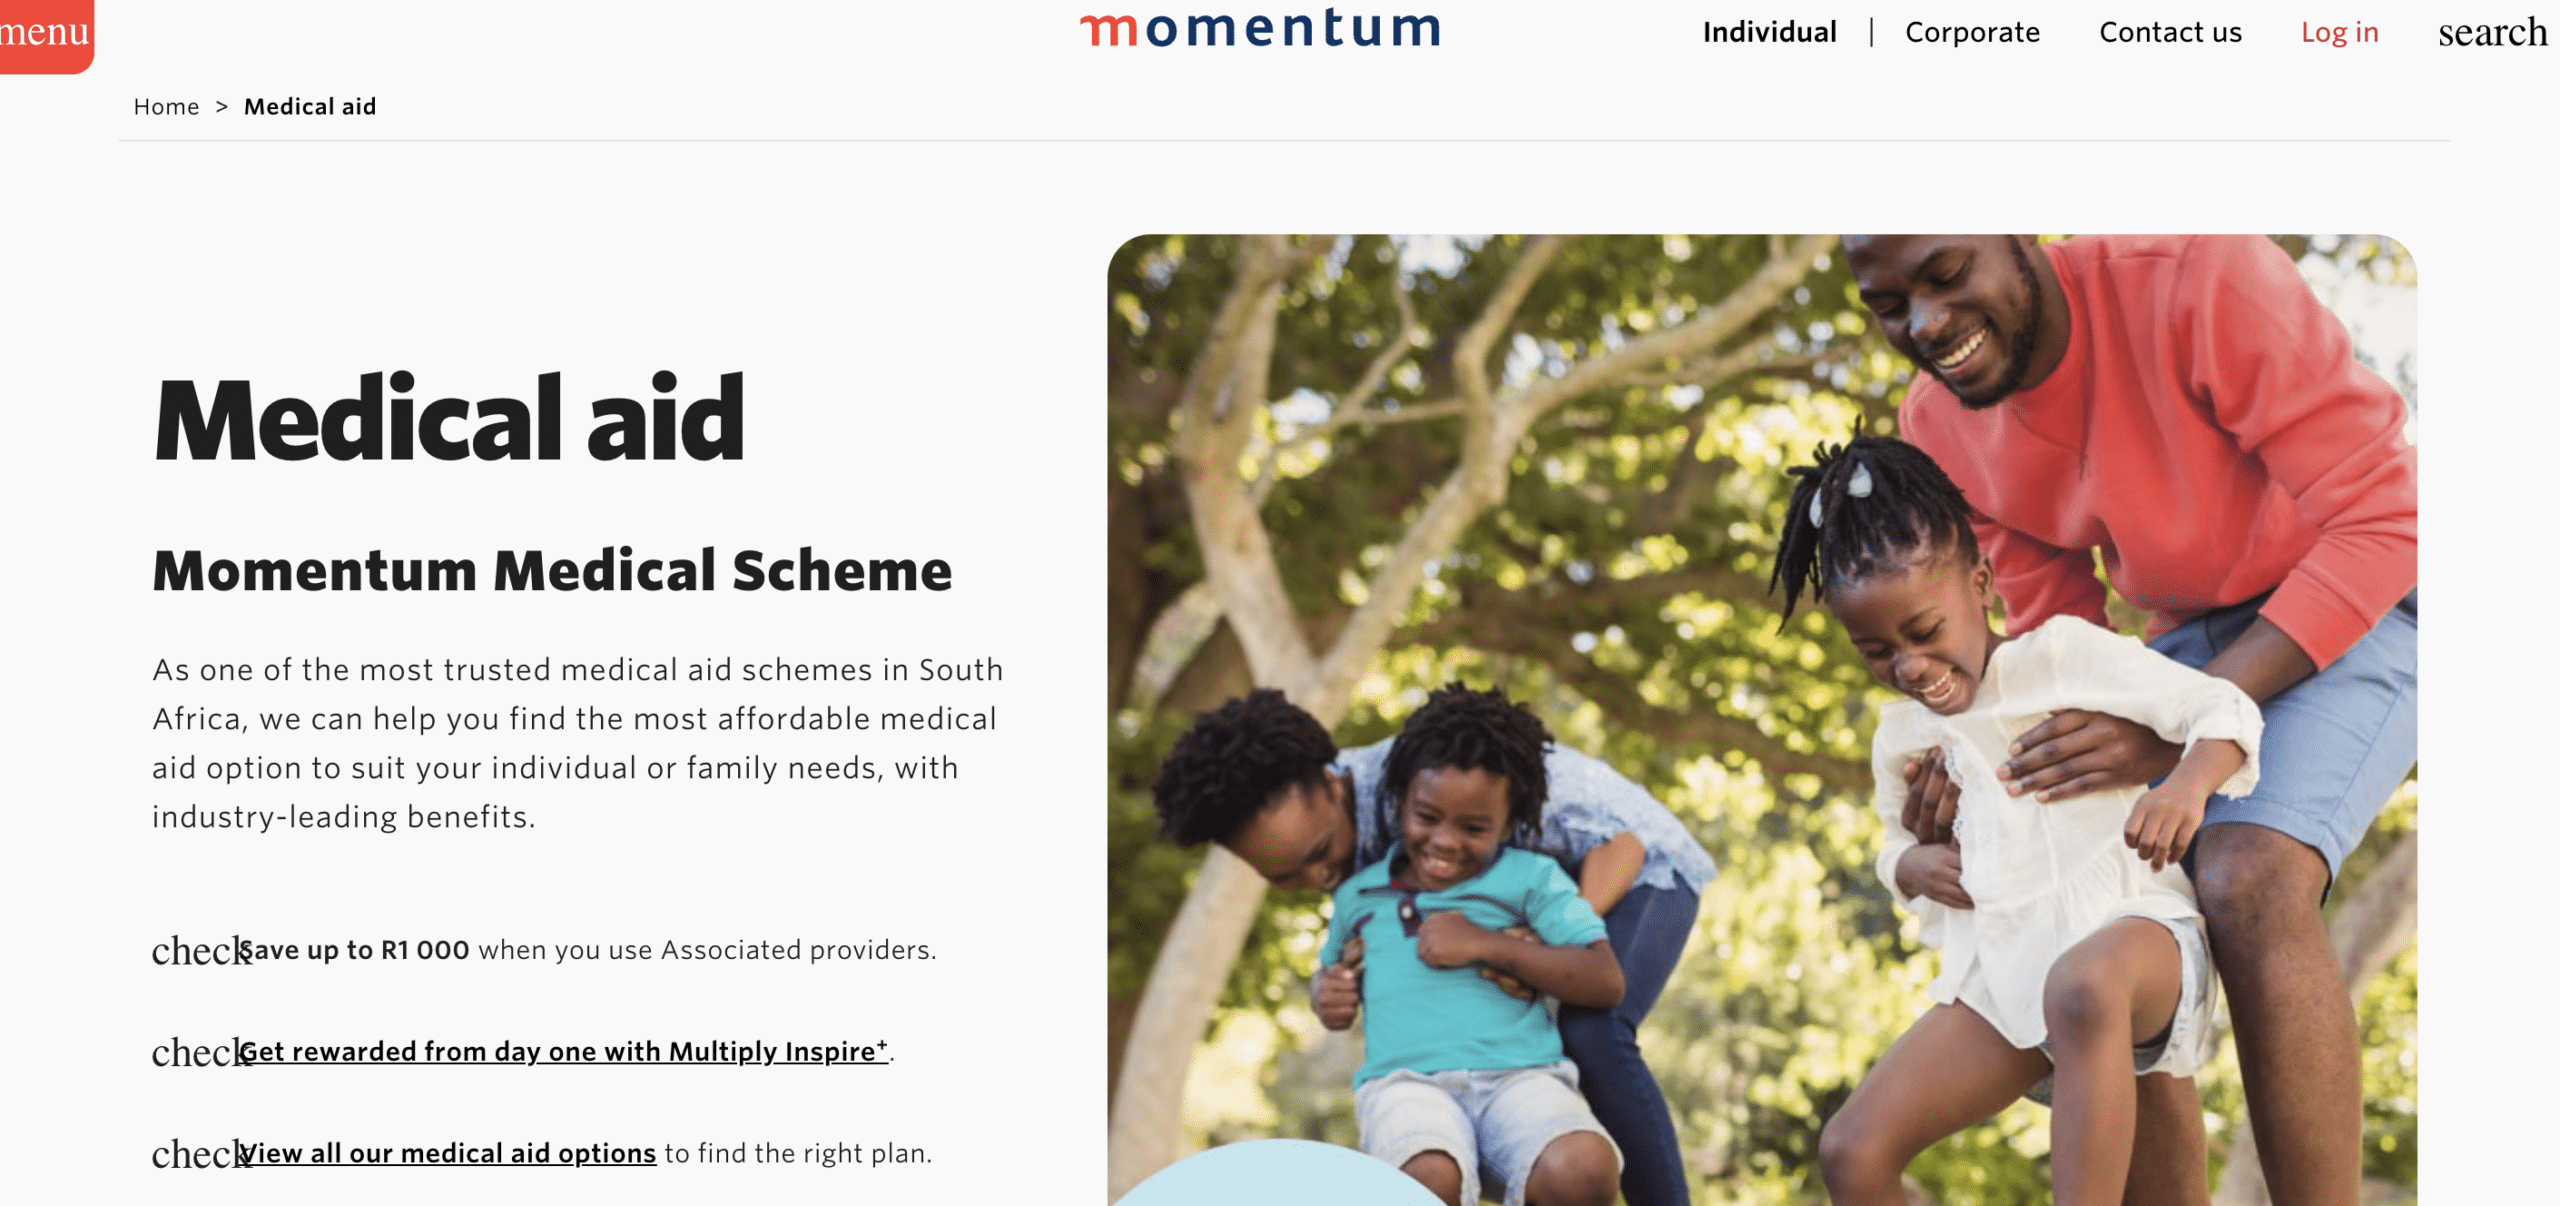 Who is Momentum Medical Scheme?